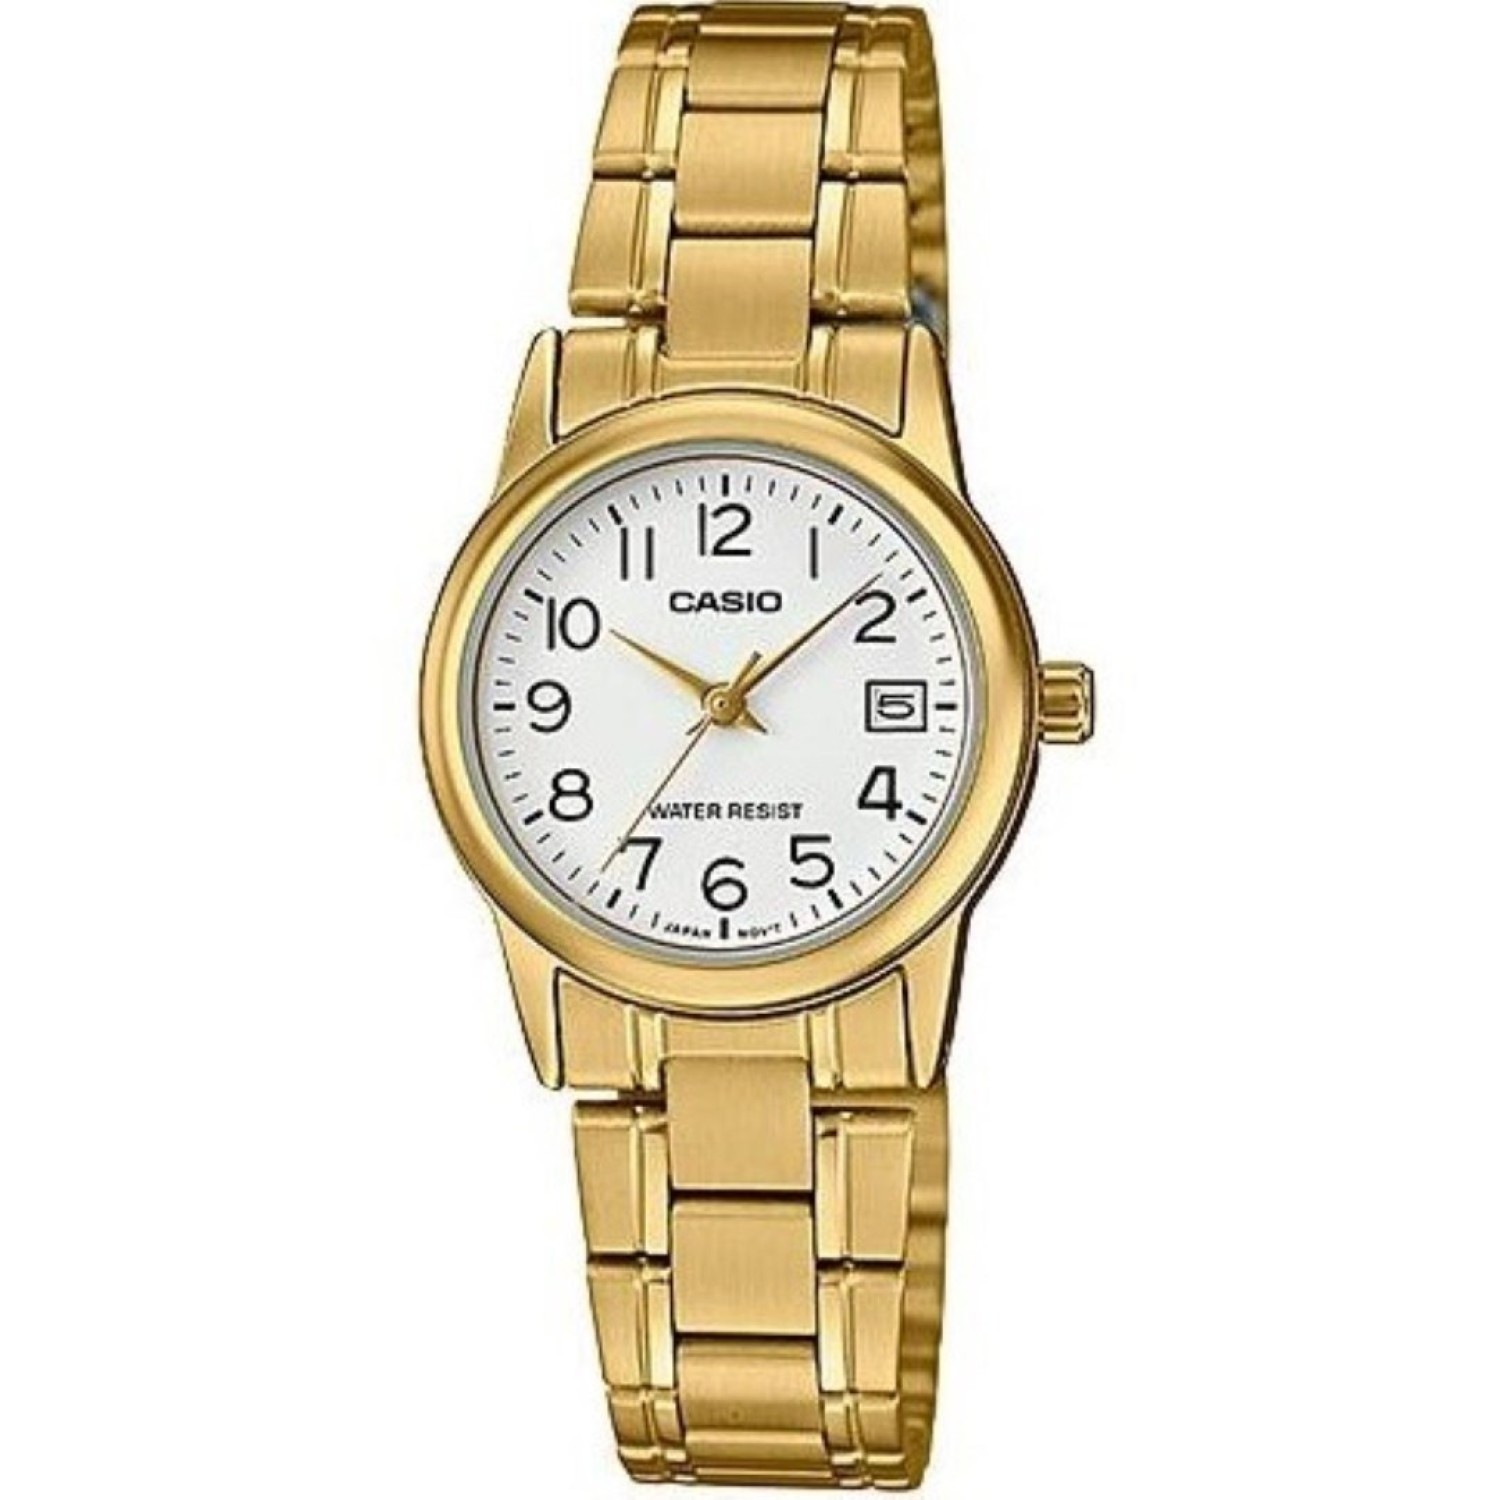 LTPV002G-7B2 Casio Ladies Stainless Steel Watch. From Casio an analogue stainless steel IP Gold plated watch with clear easy to read dial and water resistant.LAYBUY - Pay it easy, in 6 weekly payments and have it now. Only pay the price of your purchase, 